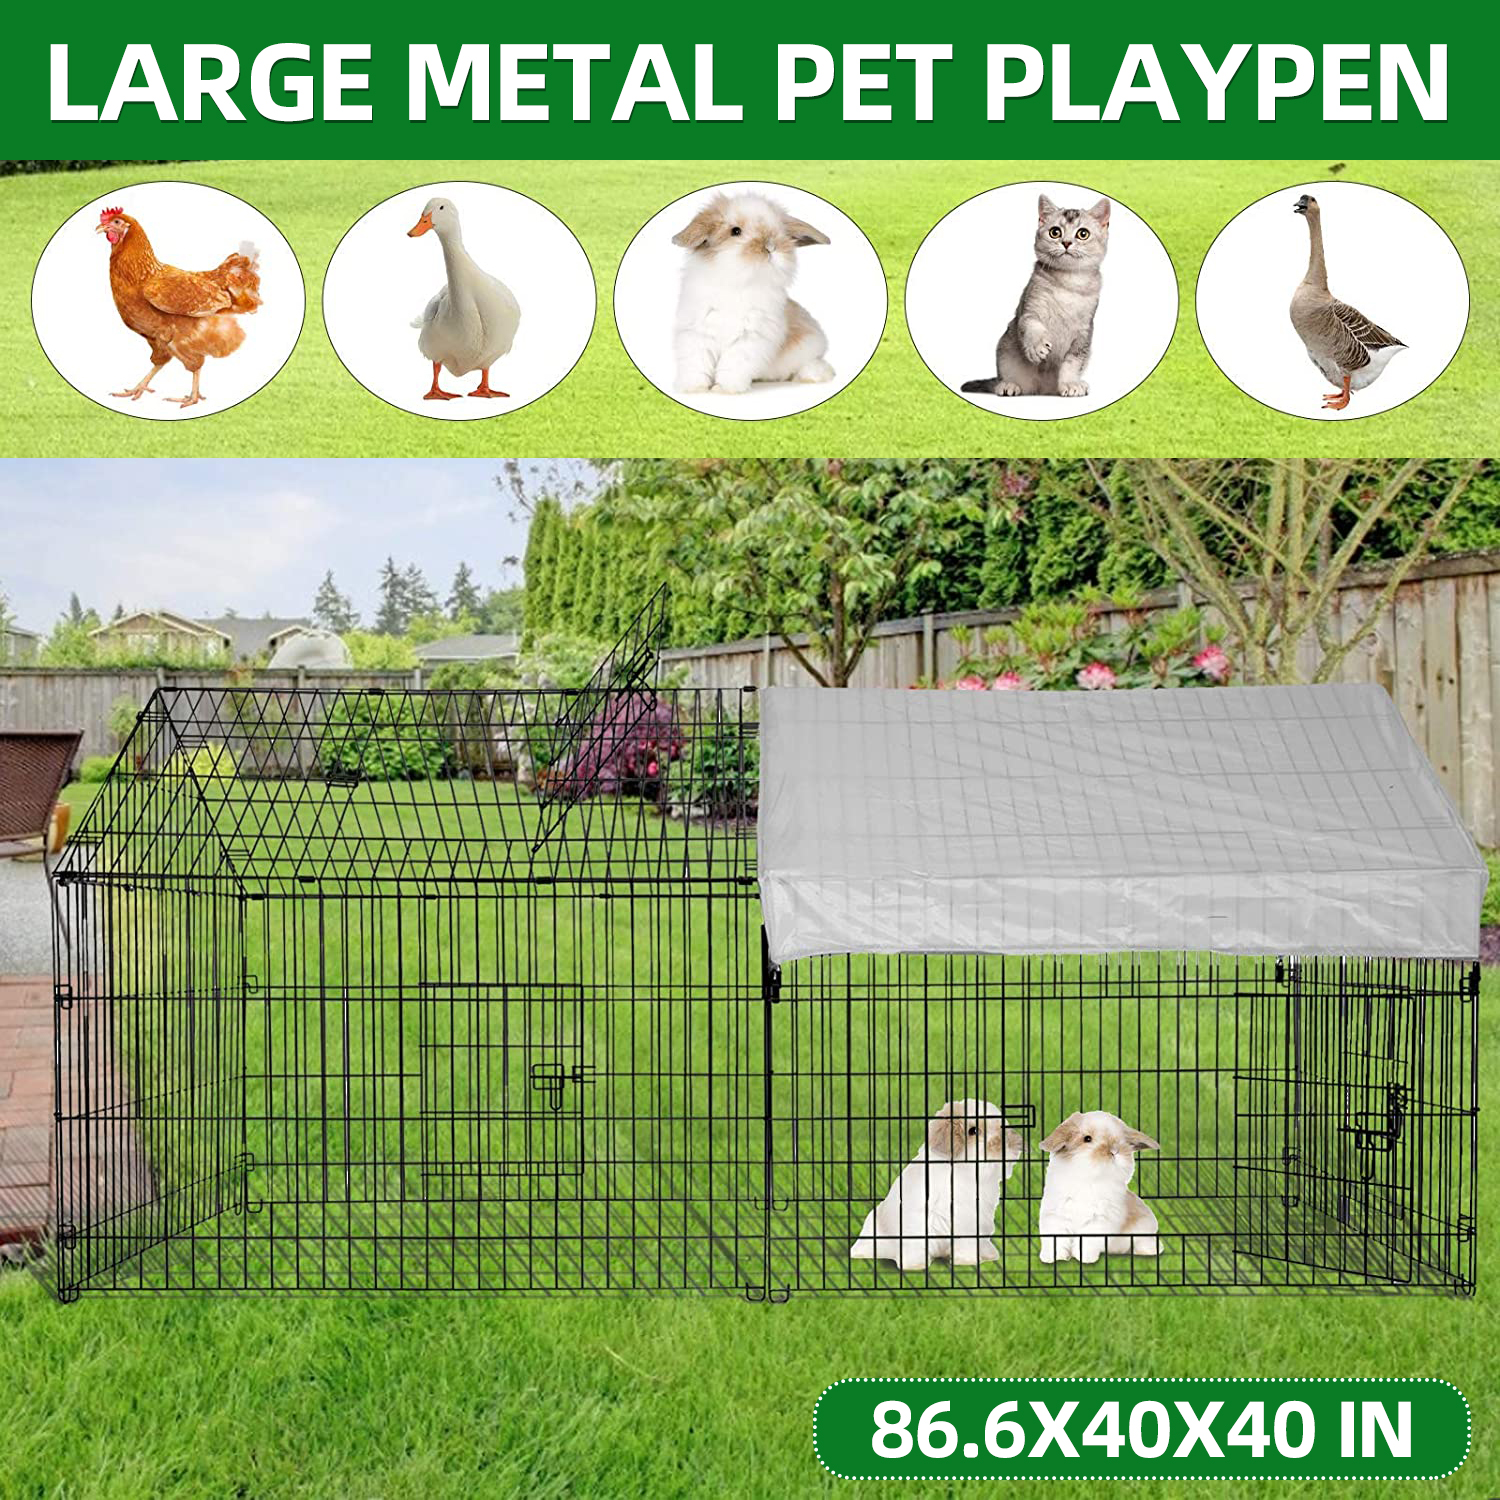 PawGiant-Chicken-Coop-Run-Cage-Upgrade-866quottimes40quottimes38quot-Metal-Chicken-Fence-Pen-Pet-Pla-1870094-4